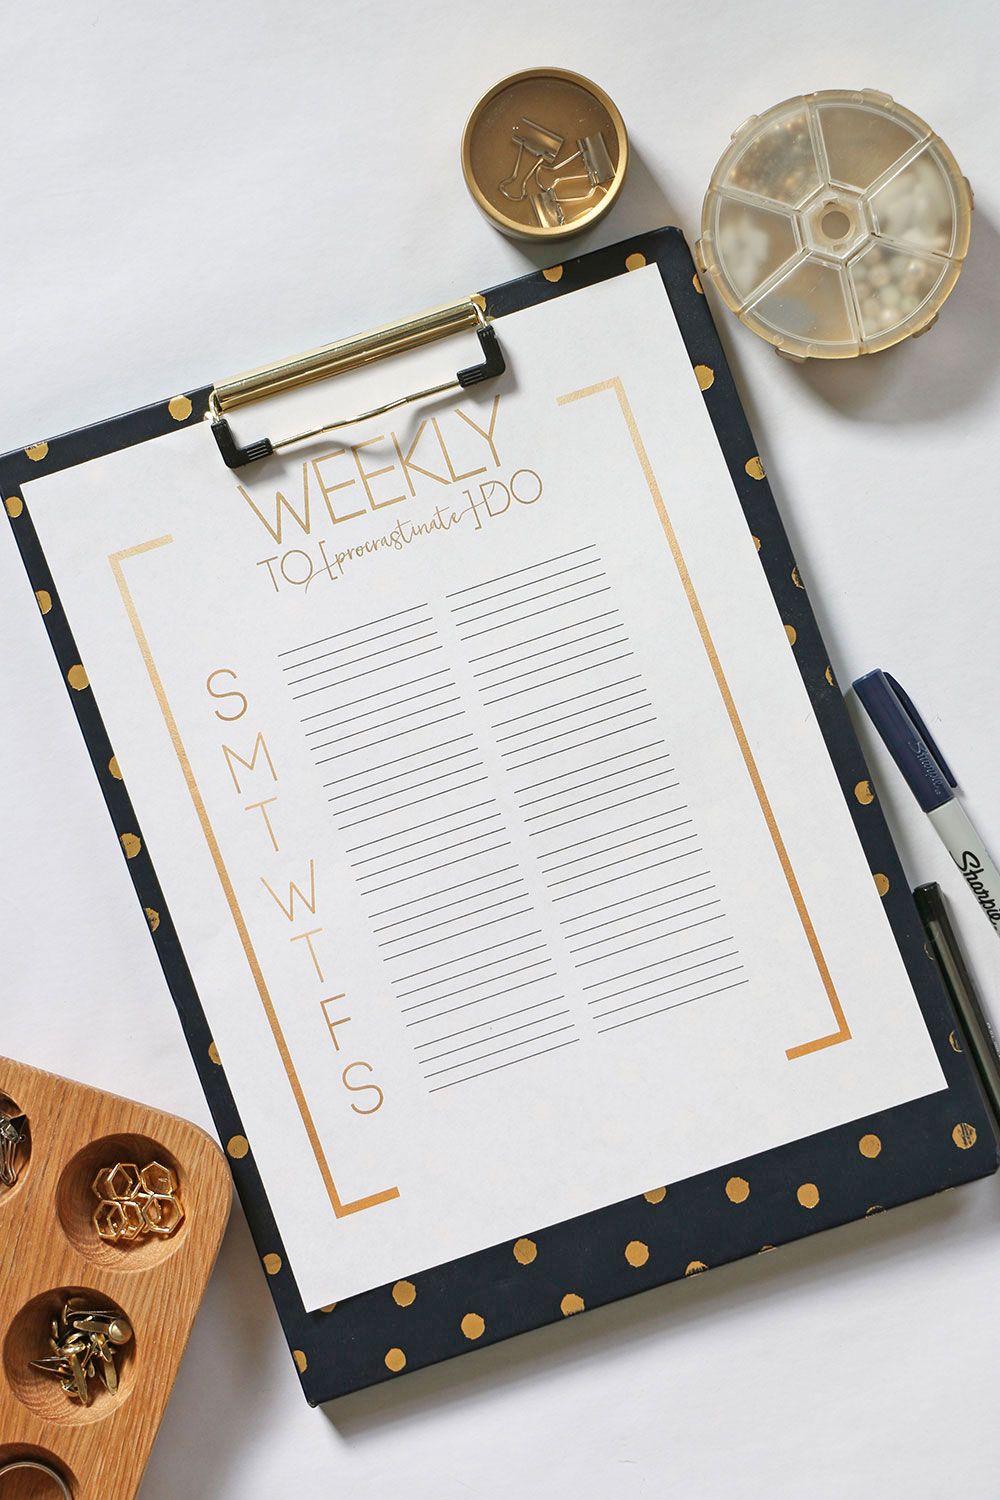 Weekly Checklist with gold lettering